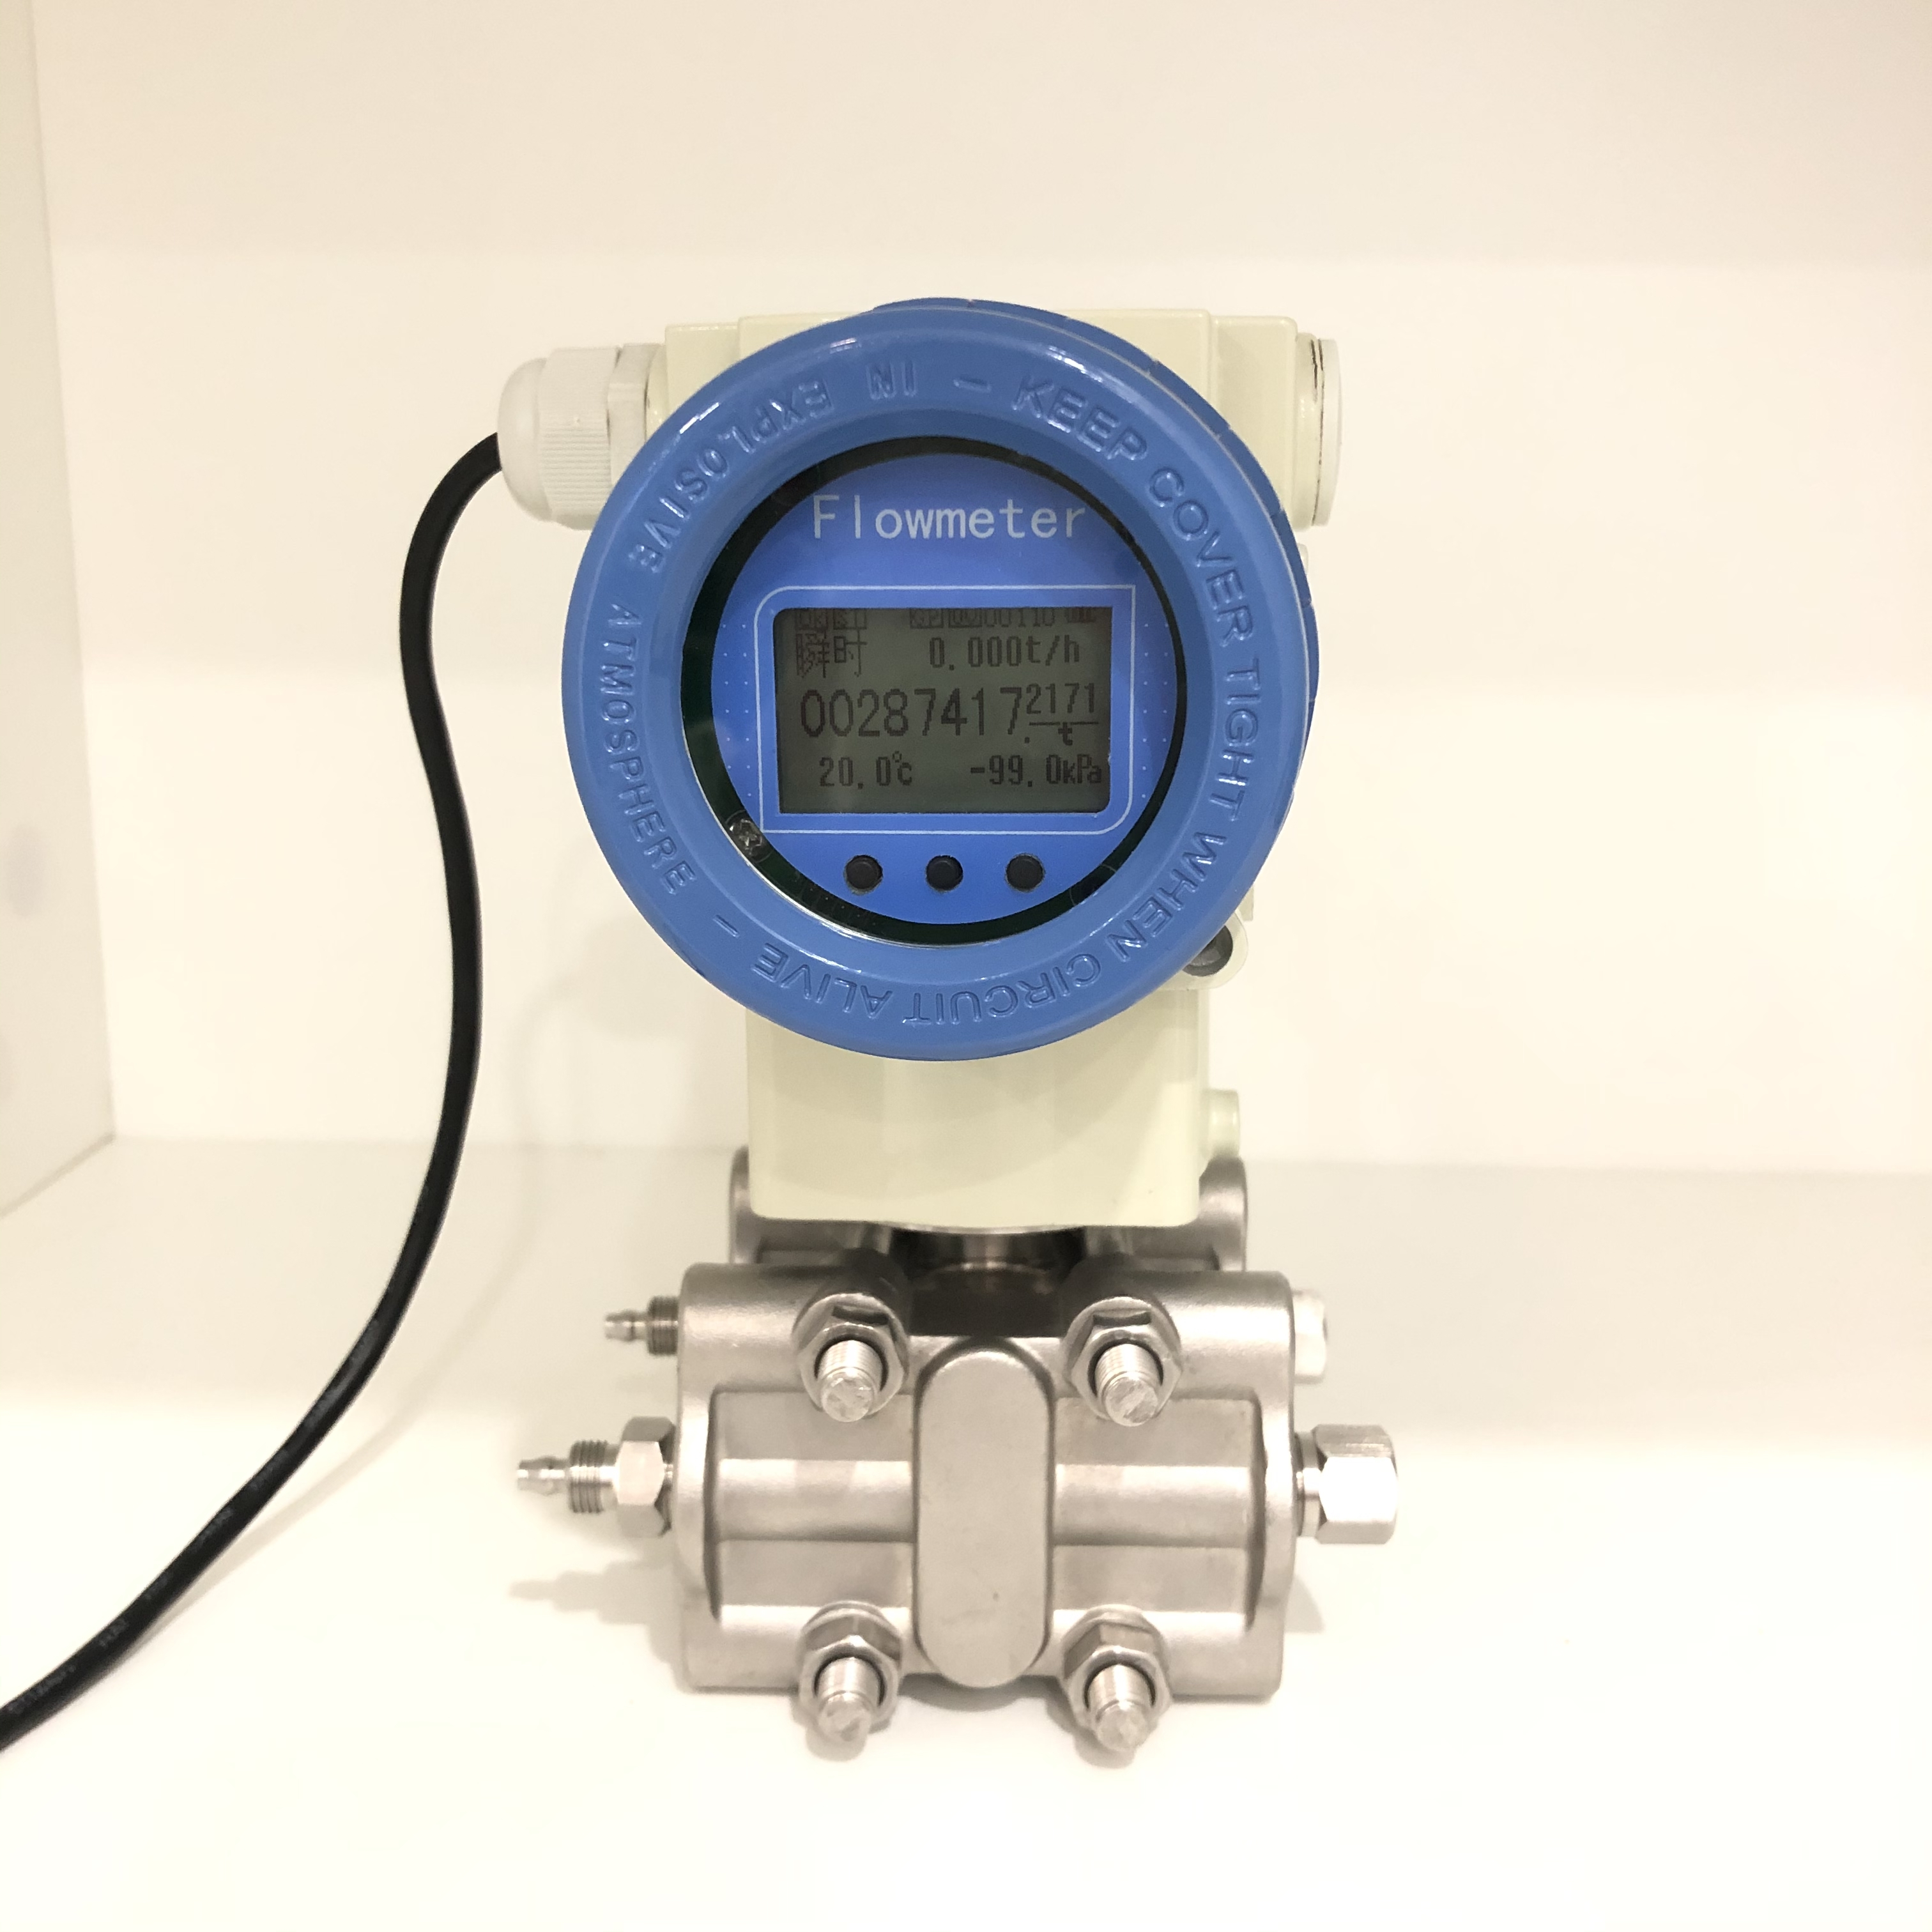 Differential pressure flow meter Featured Image